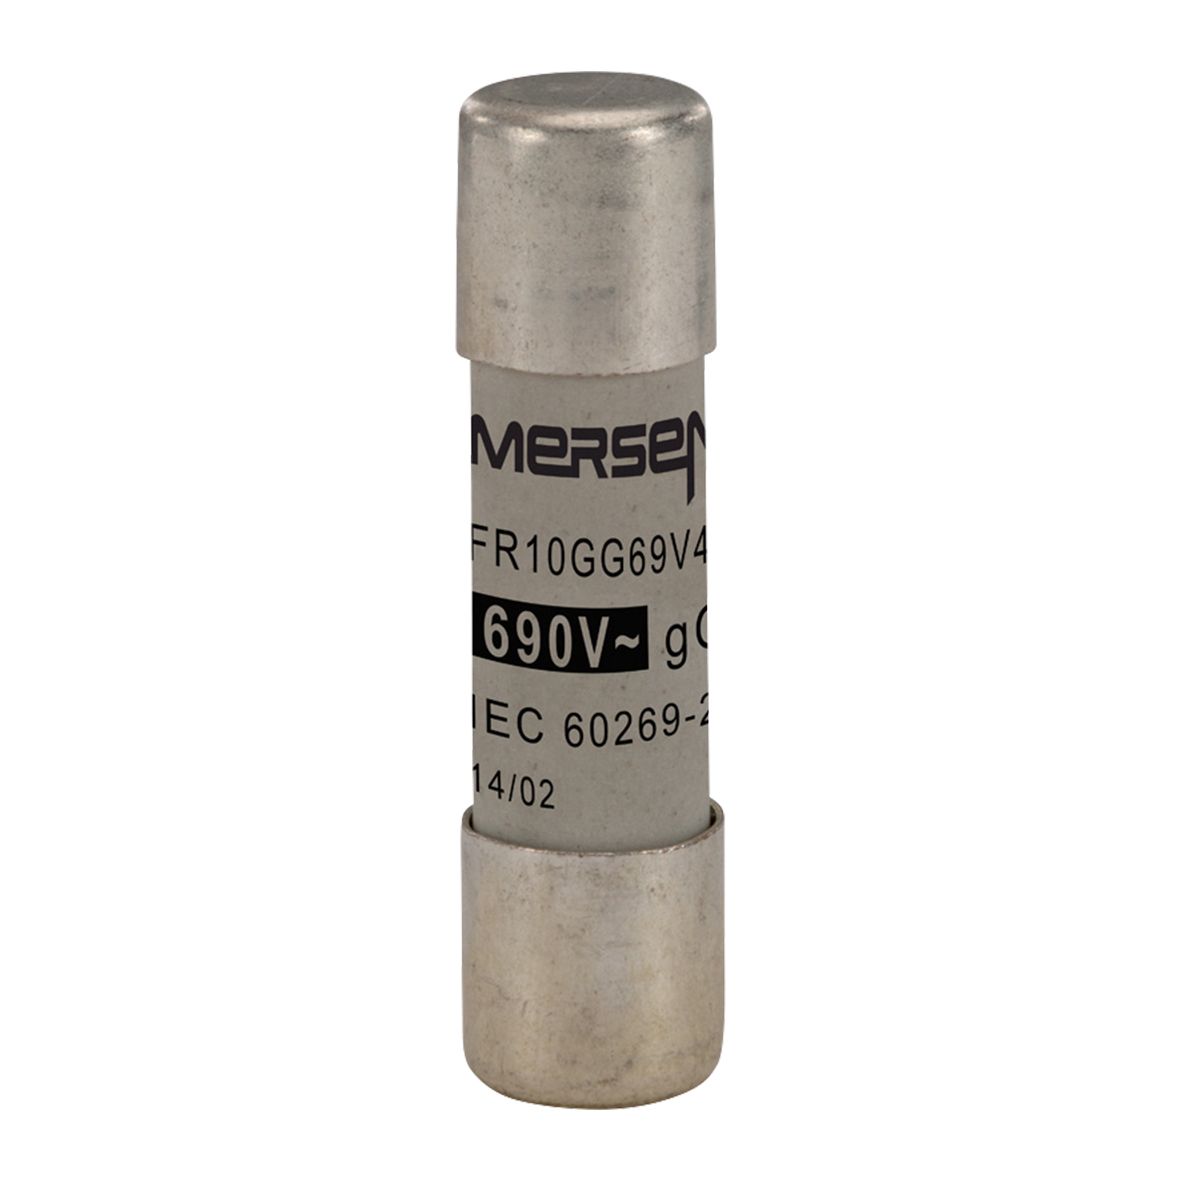 T302789 - Cylindrical fuse-link gG 690VAC 10.3x38, 4A